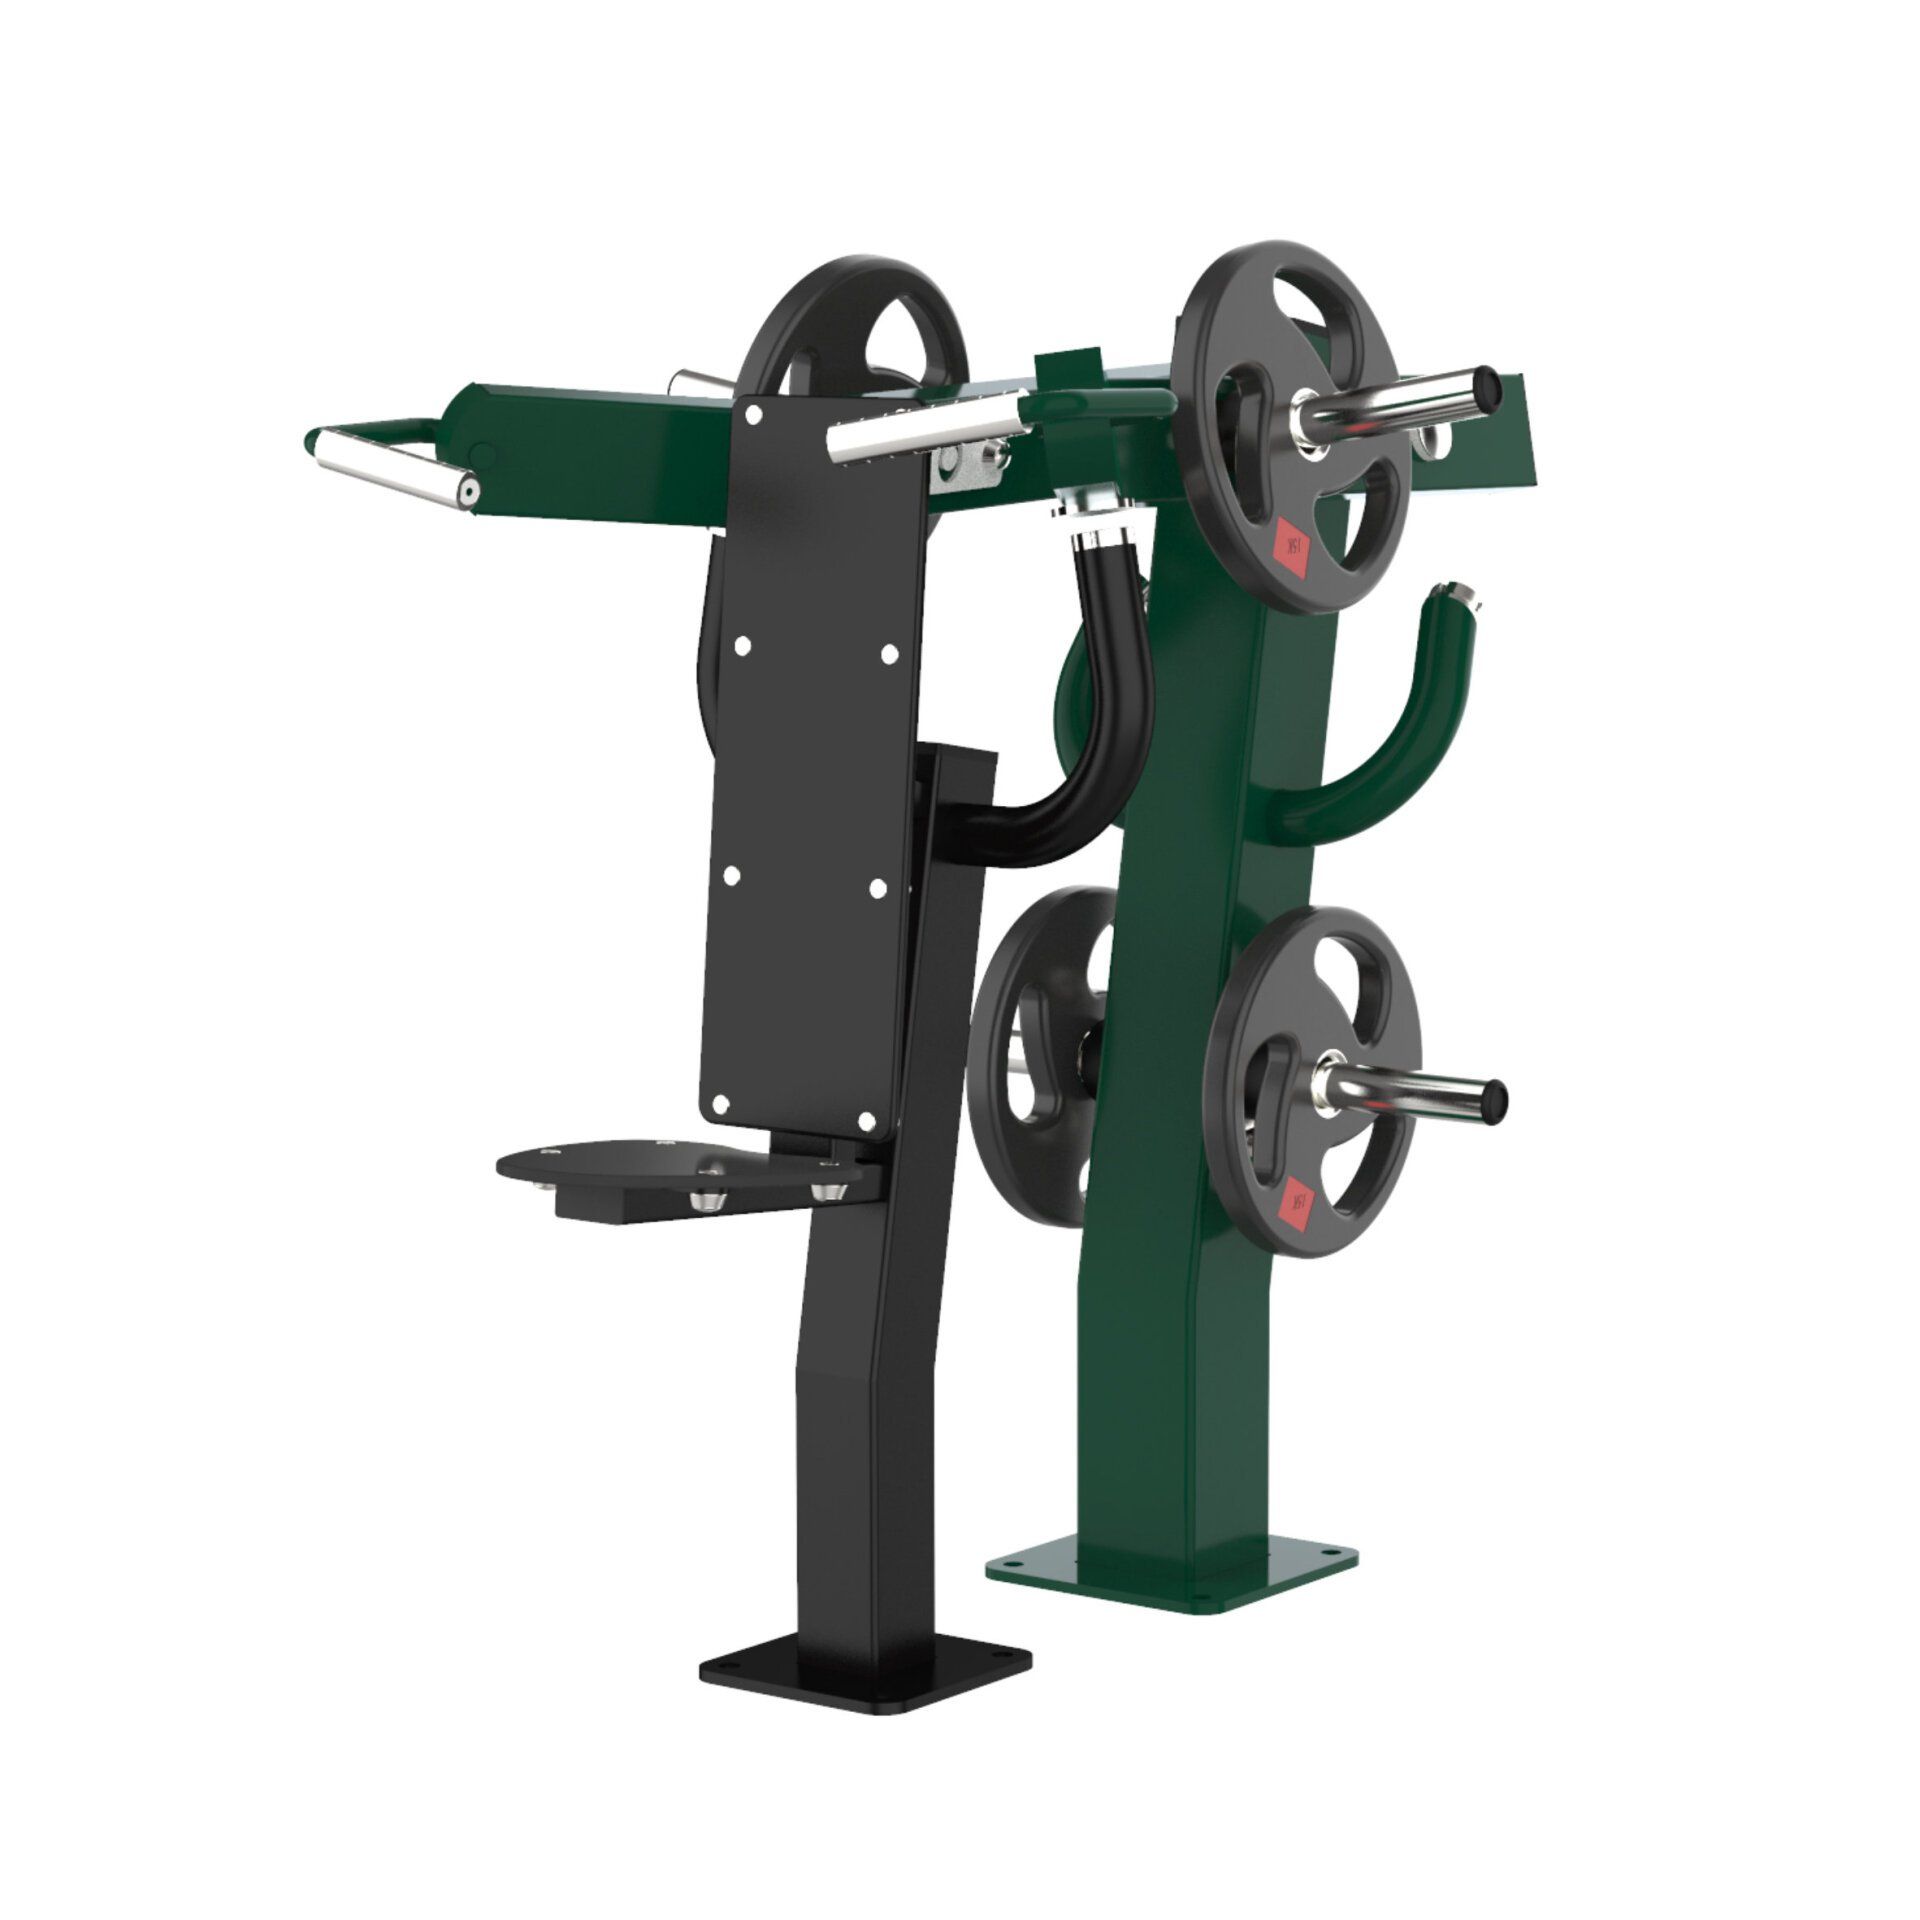 OPTEXI-002 OptiFit Excite Outdoor Plate Loaded Shoulder Press